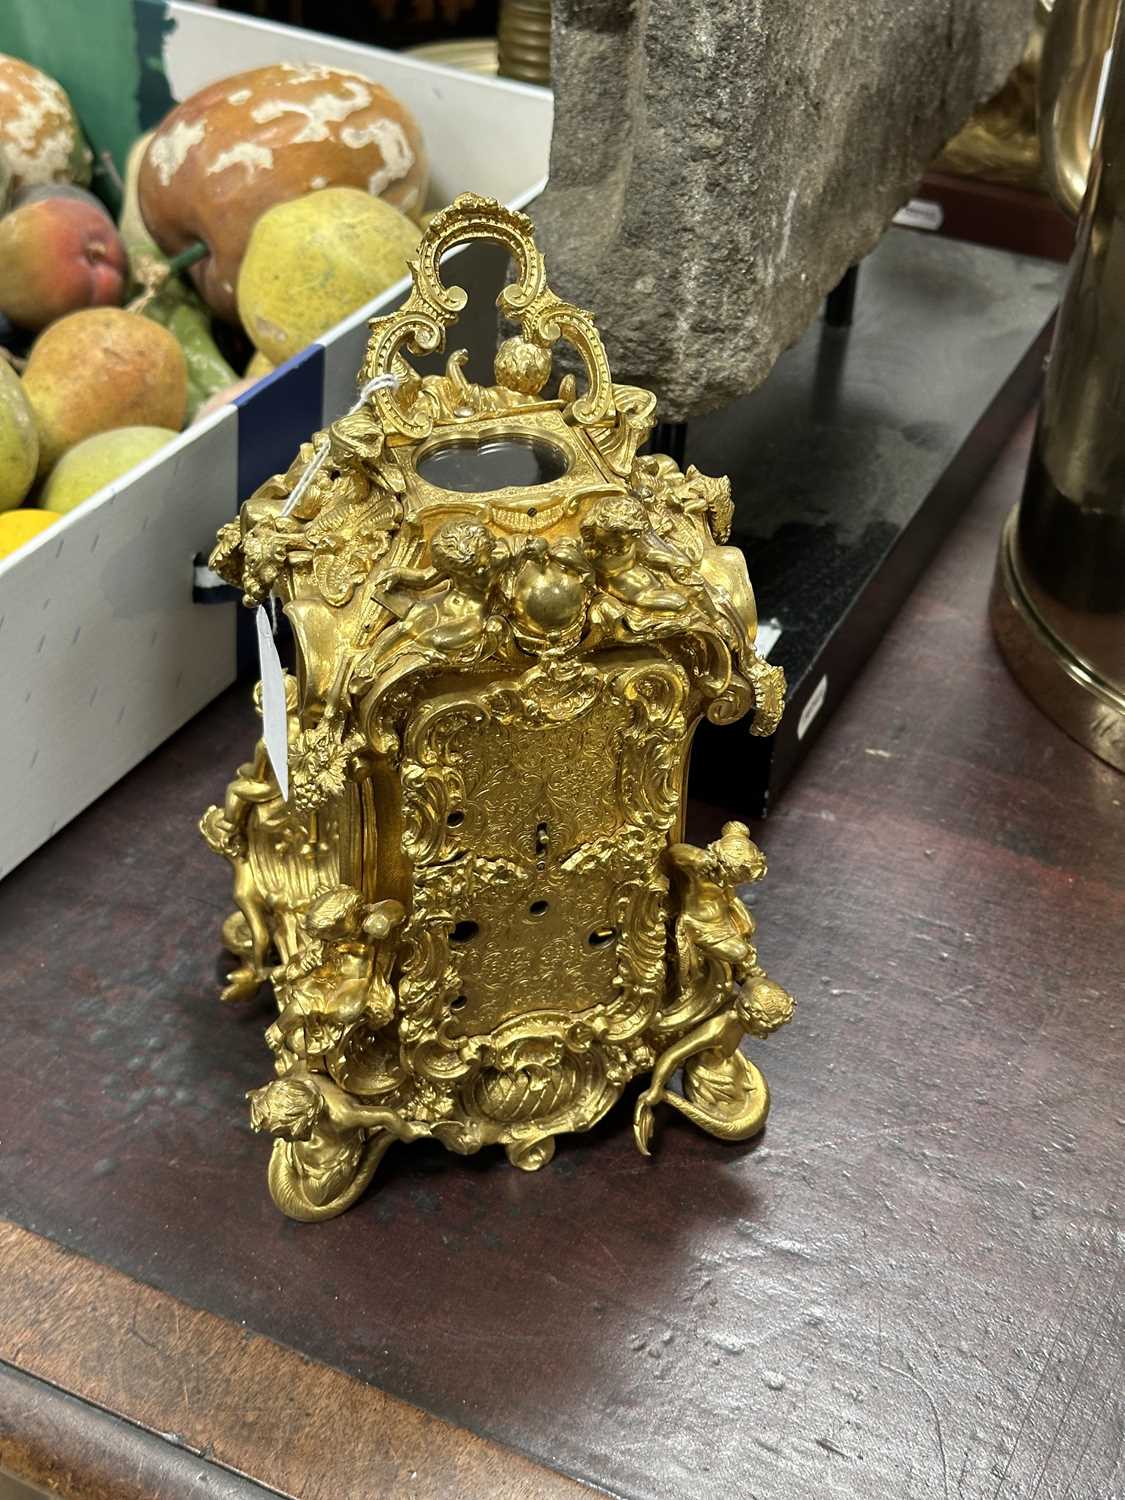 GROHE, PARIS. A FINE AND RARE MID 19TH CENTURY FRENCH CAST GILT BRASS ROCOCO REPEATING PETITE SONNER - Image 16 of 17